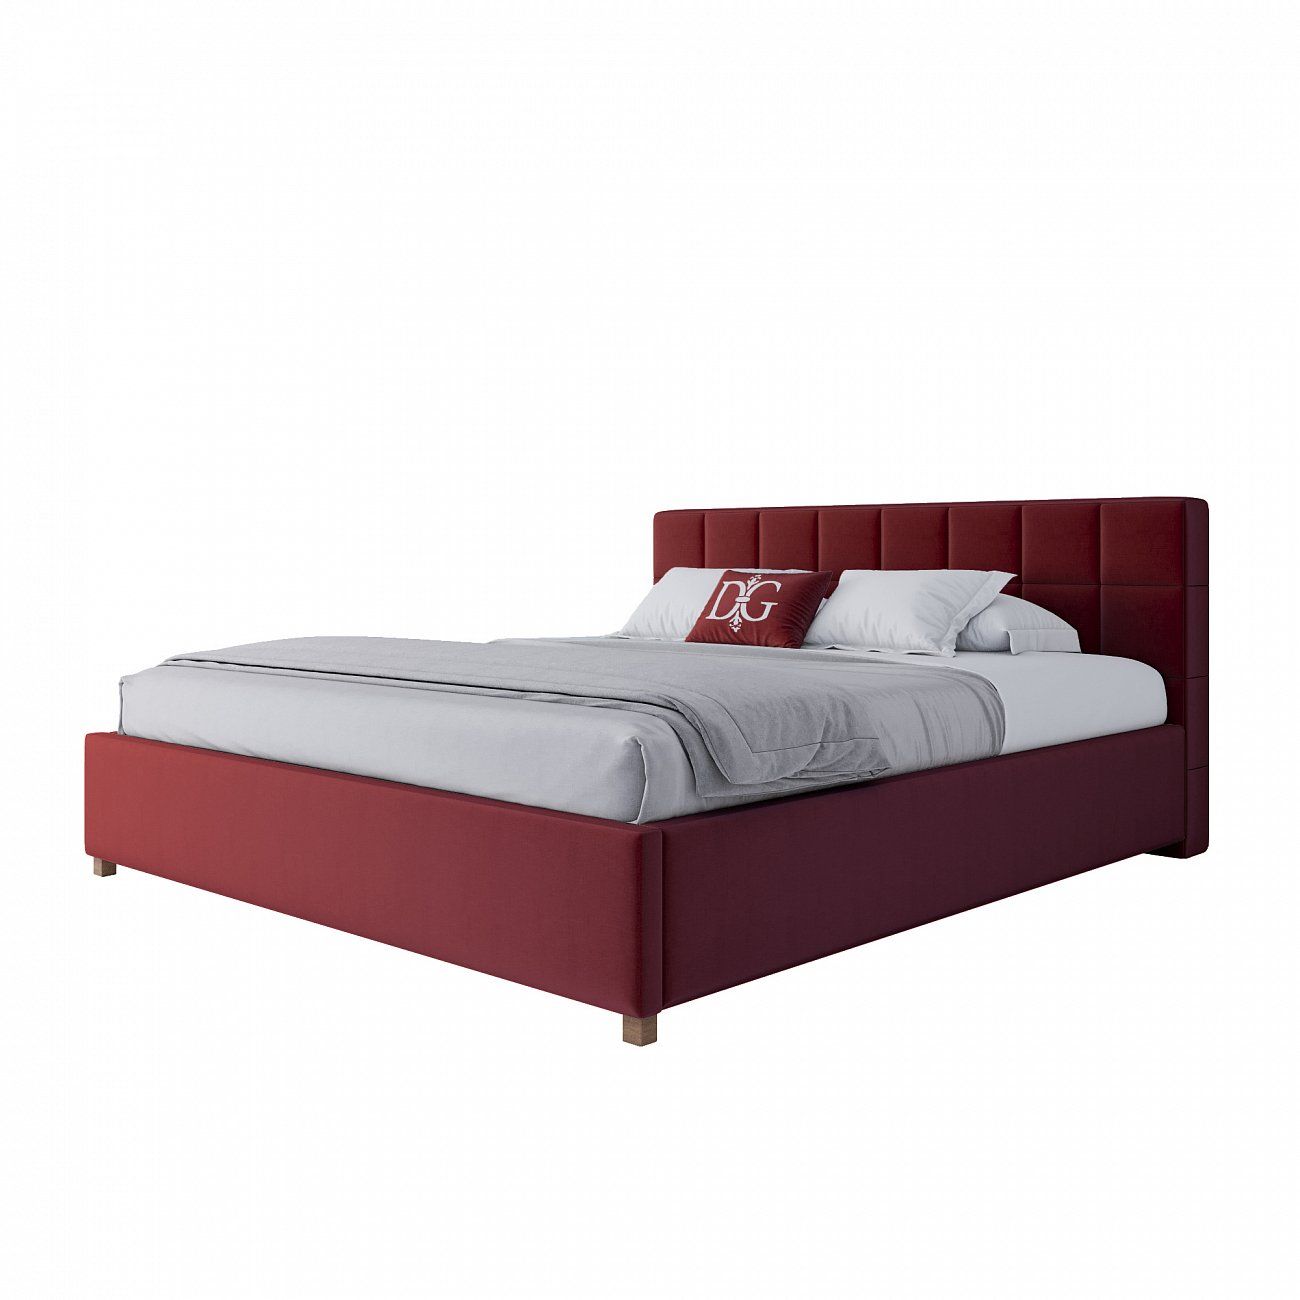 Double bed with upholstered headboard 180x200 cm red Wales